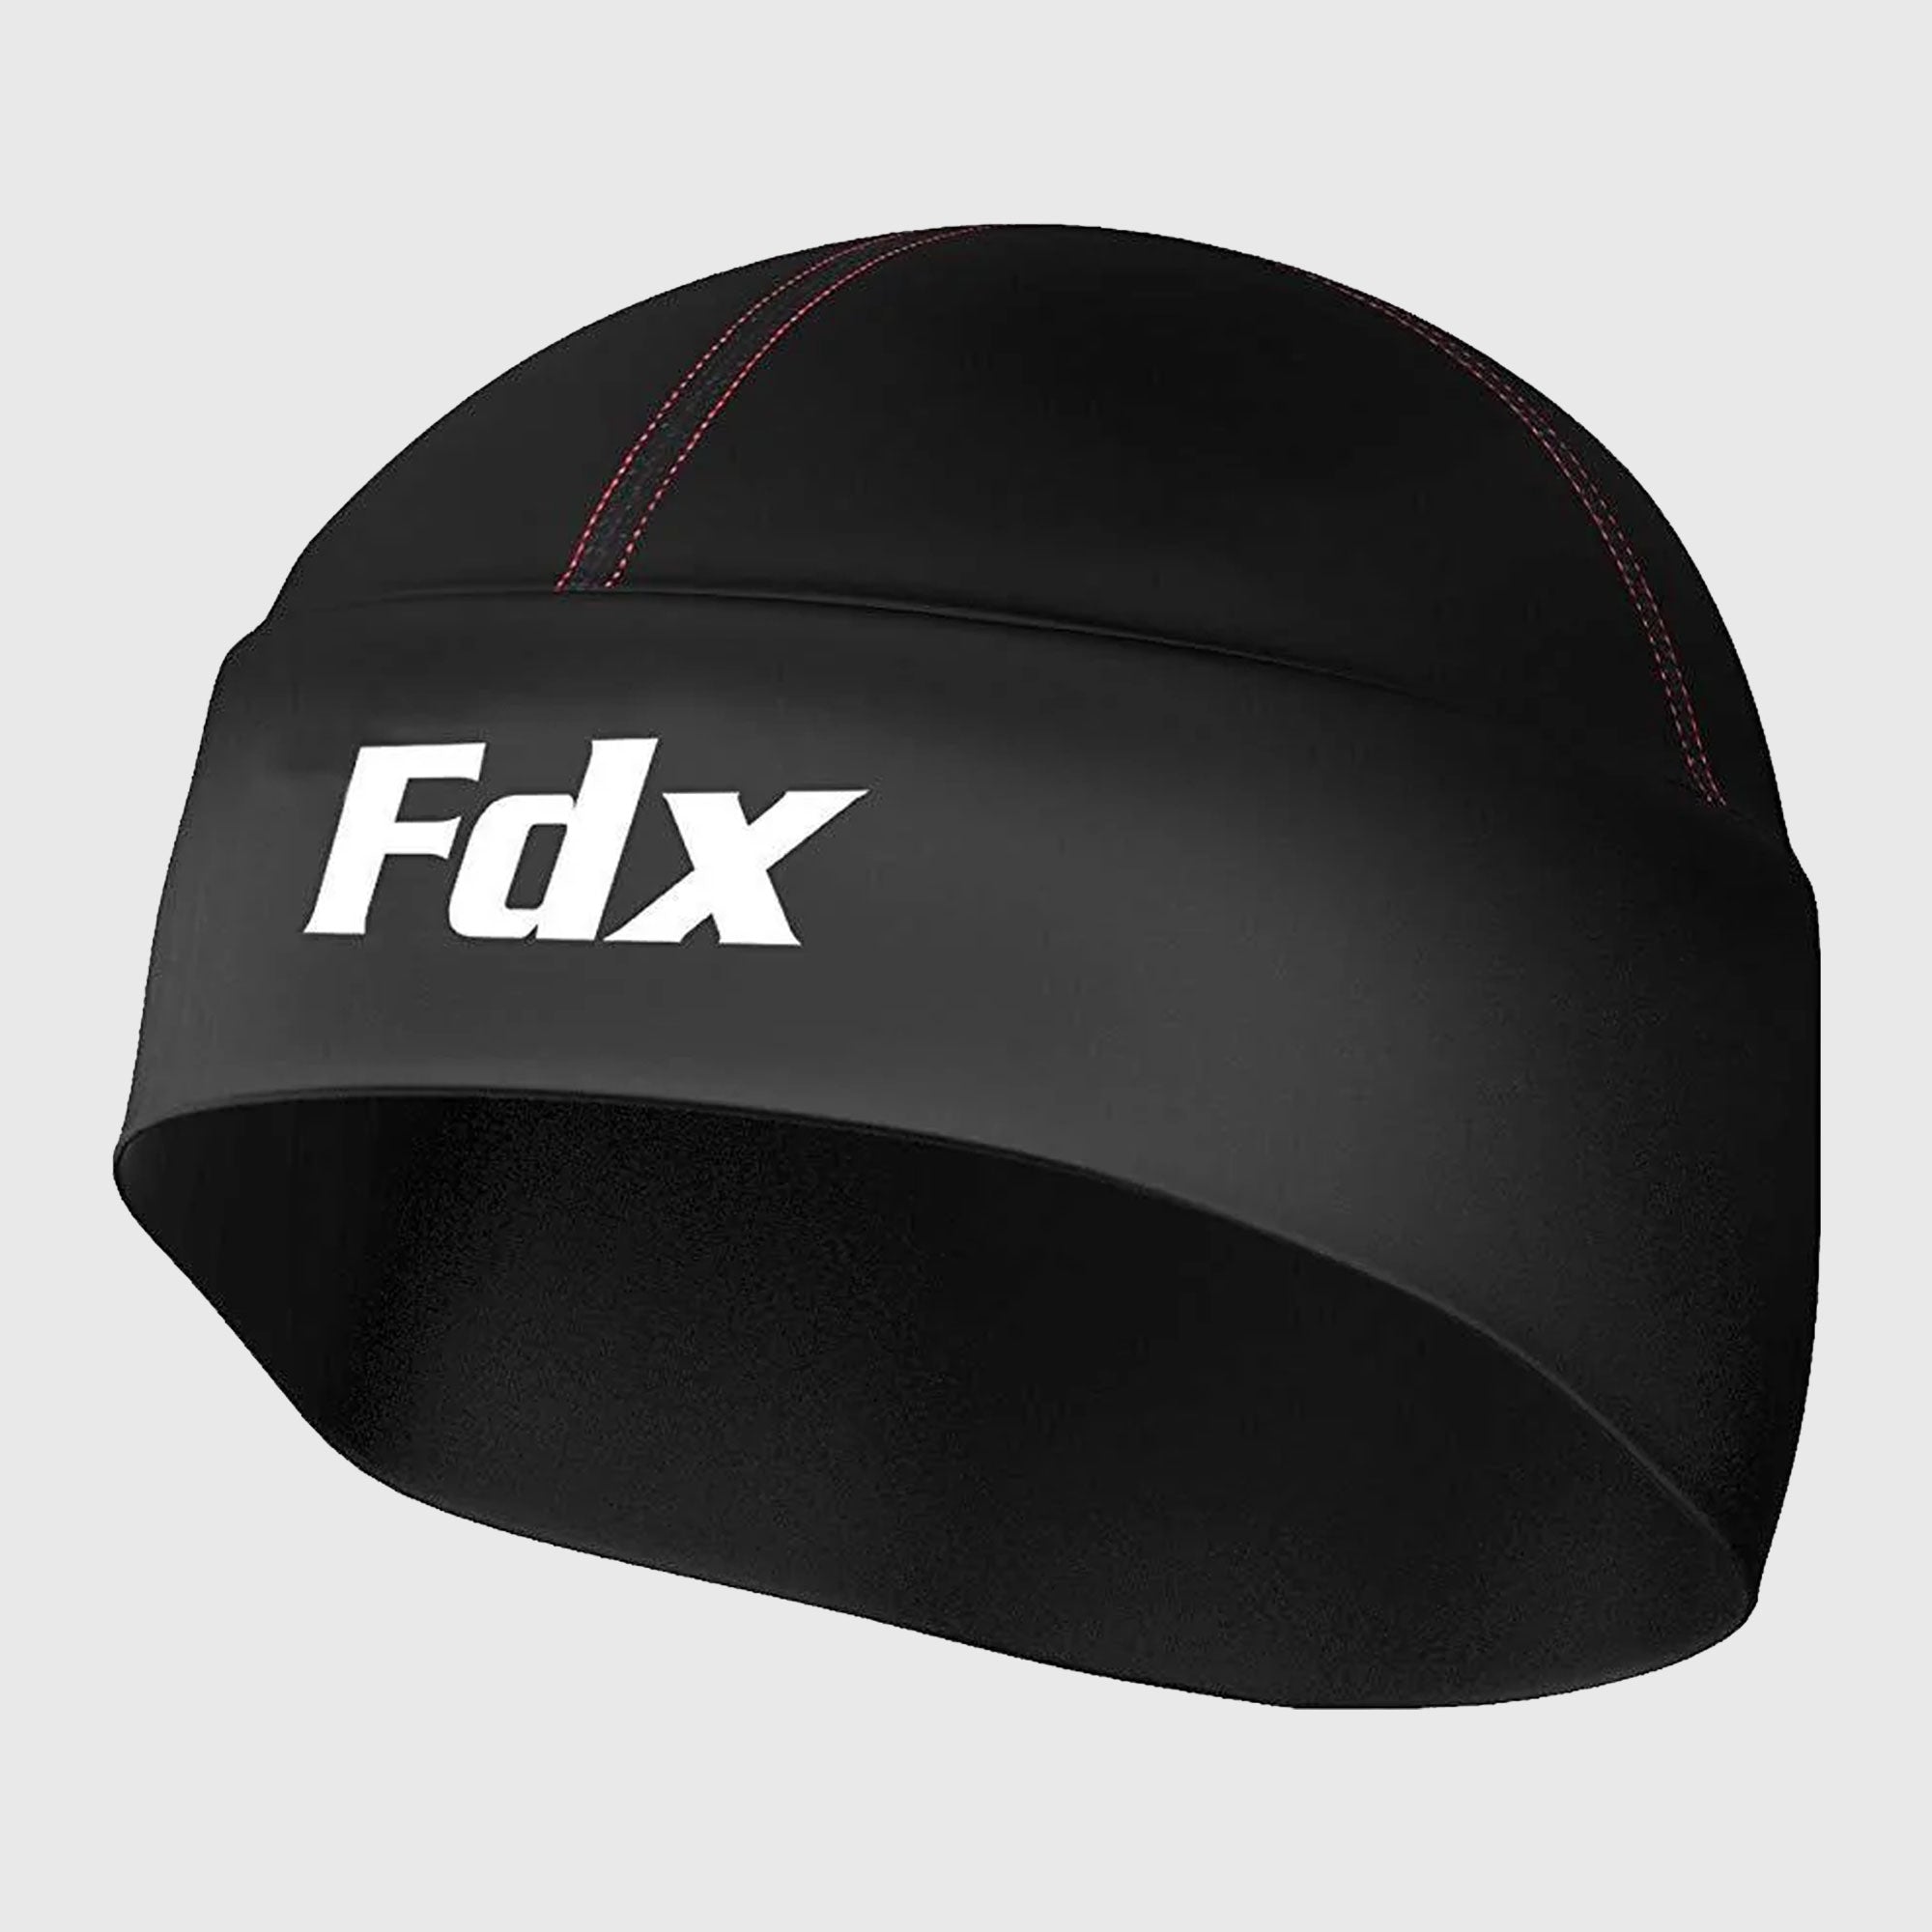 Buy Fdx Skin-Fit Windproof Winter Thermal Cycling Skull Caps | FDX